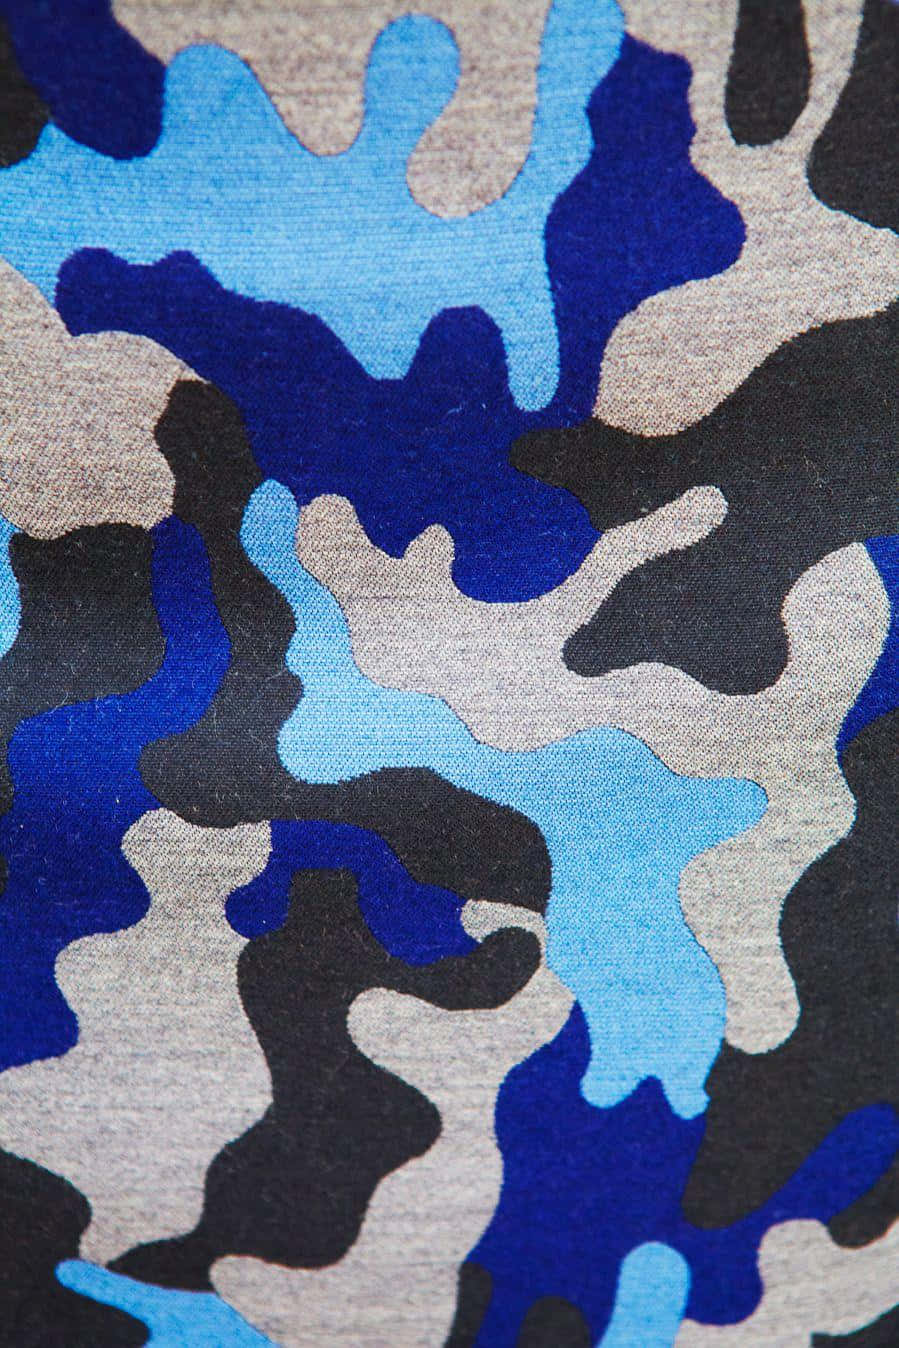 Eye-catching blue camo design brings together classic style and modern trends for an exciting new look. Wallpaper